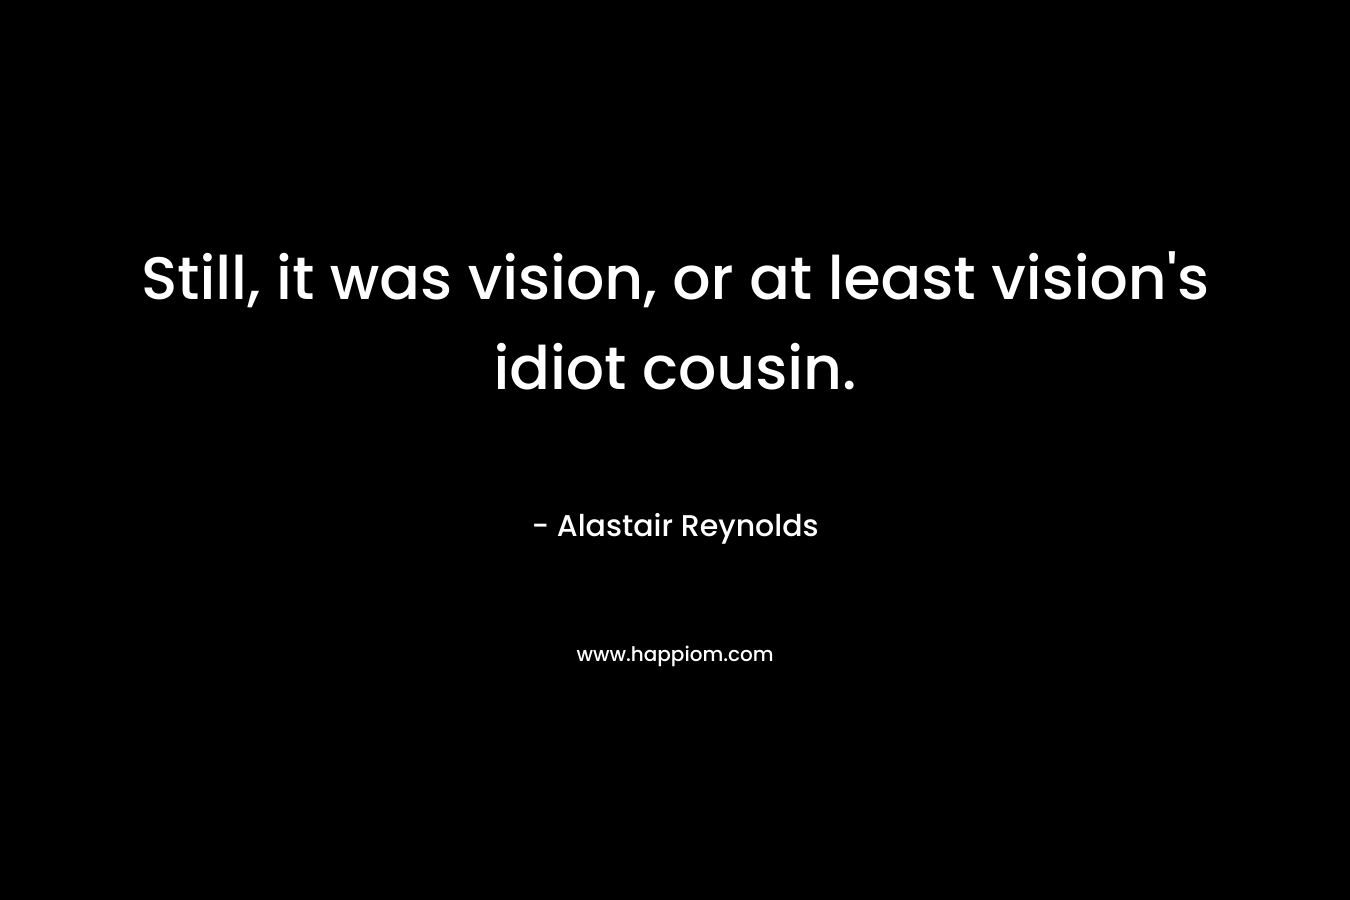 Still, it was vision, or at least vision’s idiot cousin. – Alastair Reynolds